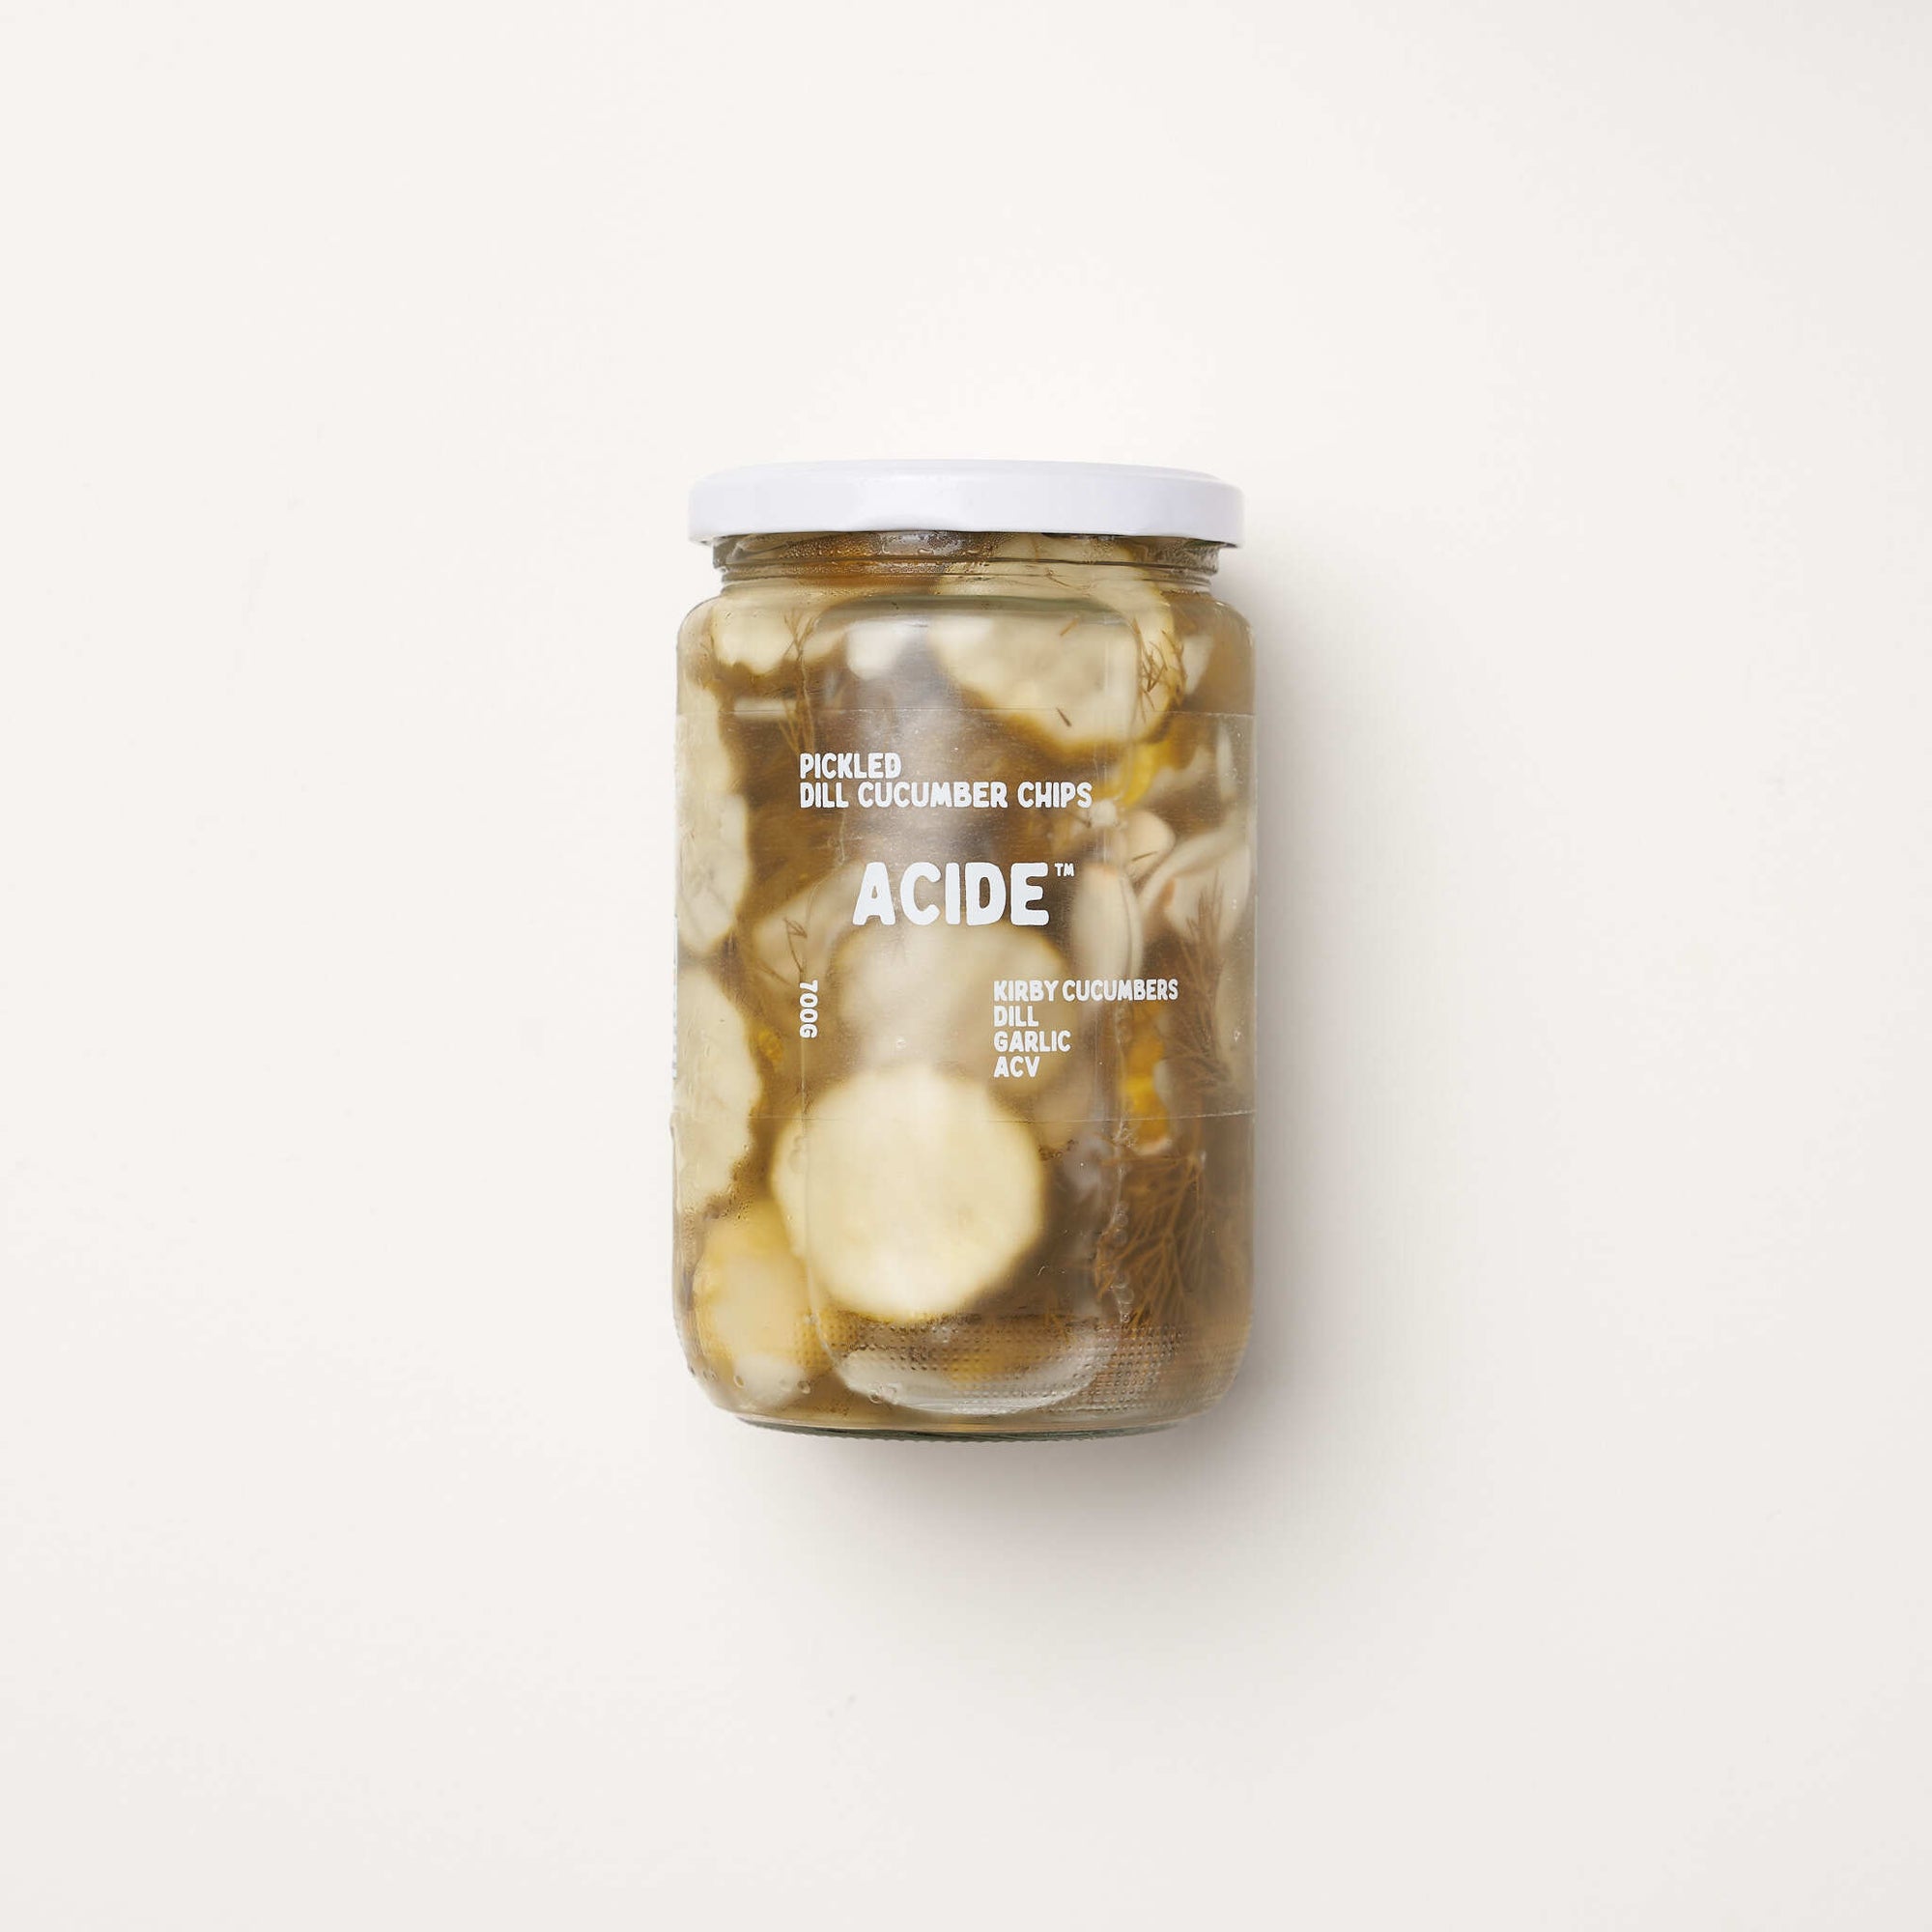 ACIDE Pickled Dill Cucumber Chips